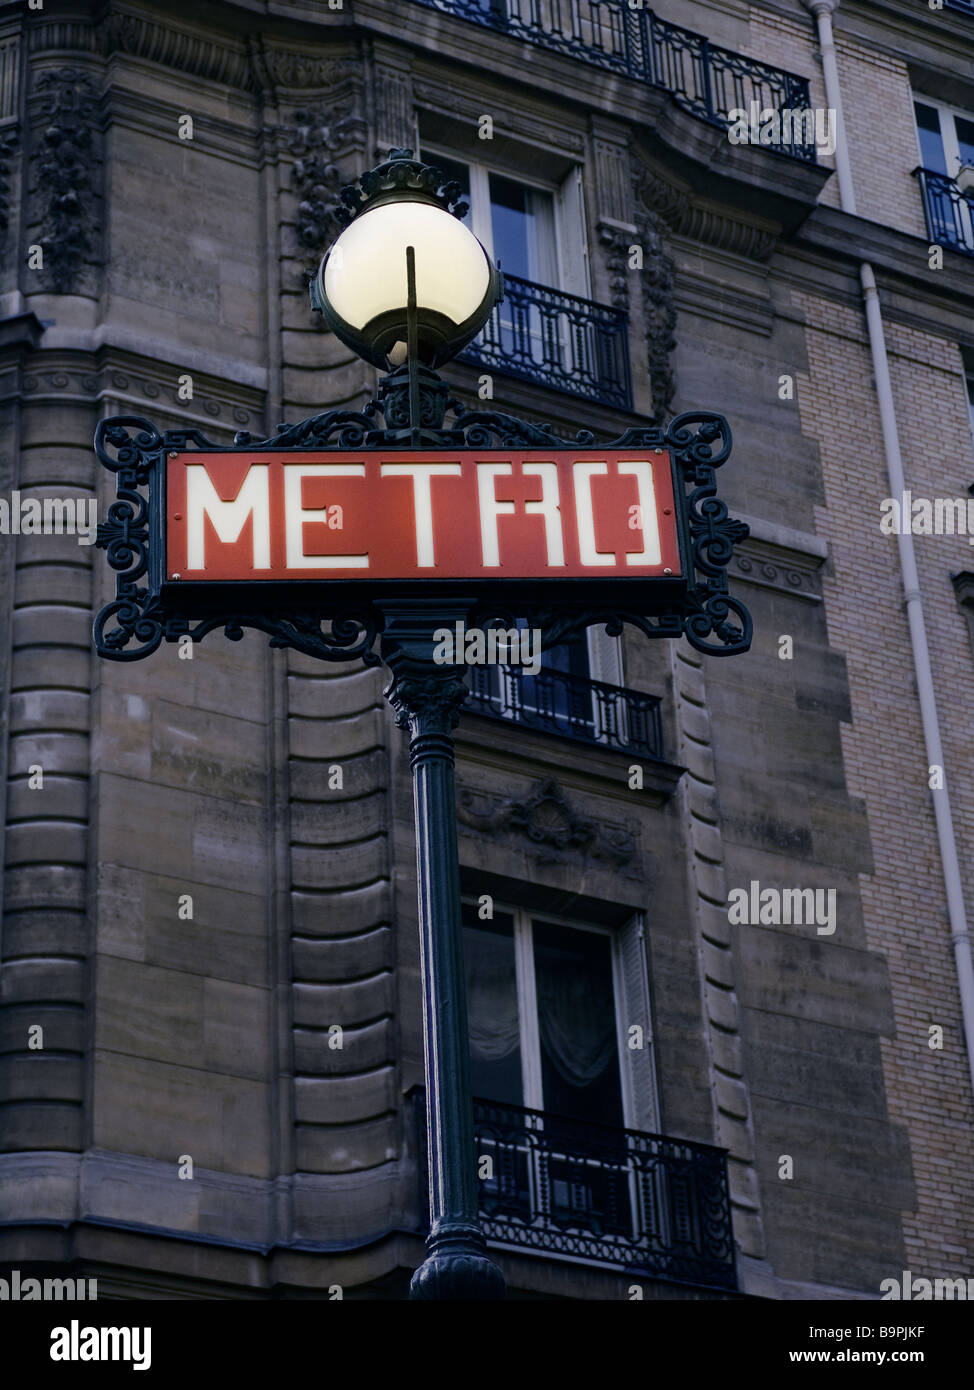 Iconic Metro underground sign at dusk with building in the background, Paris France Stock Photo